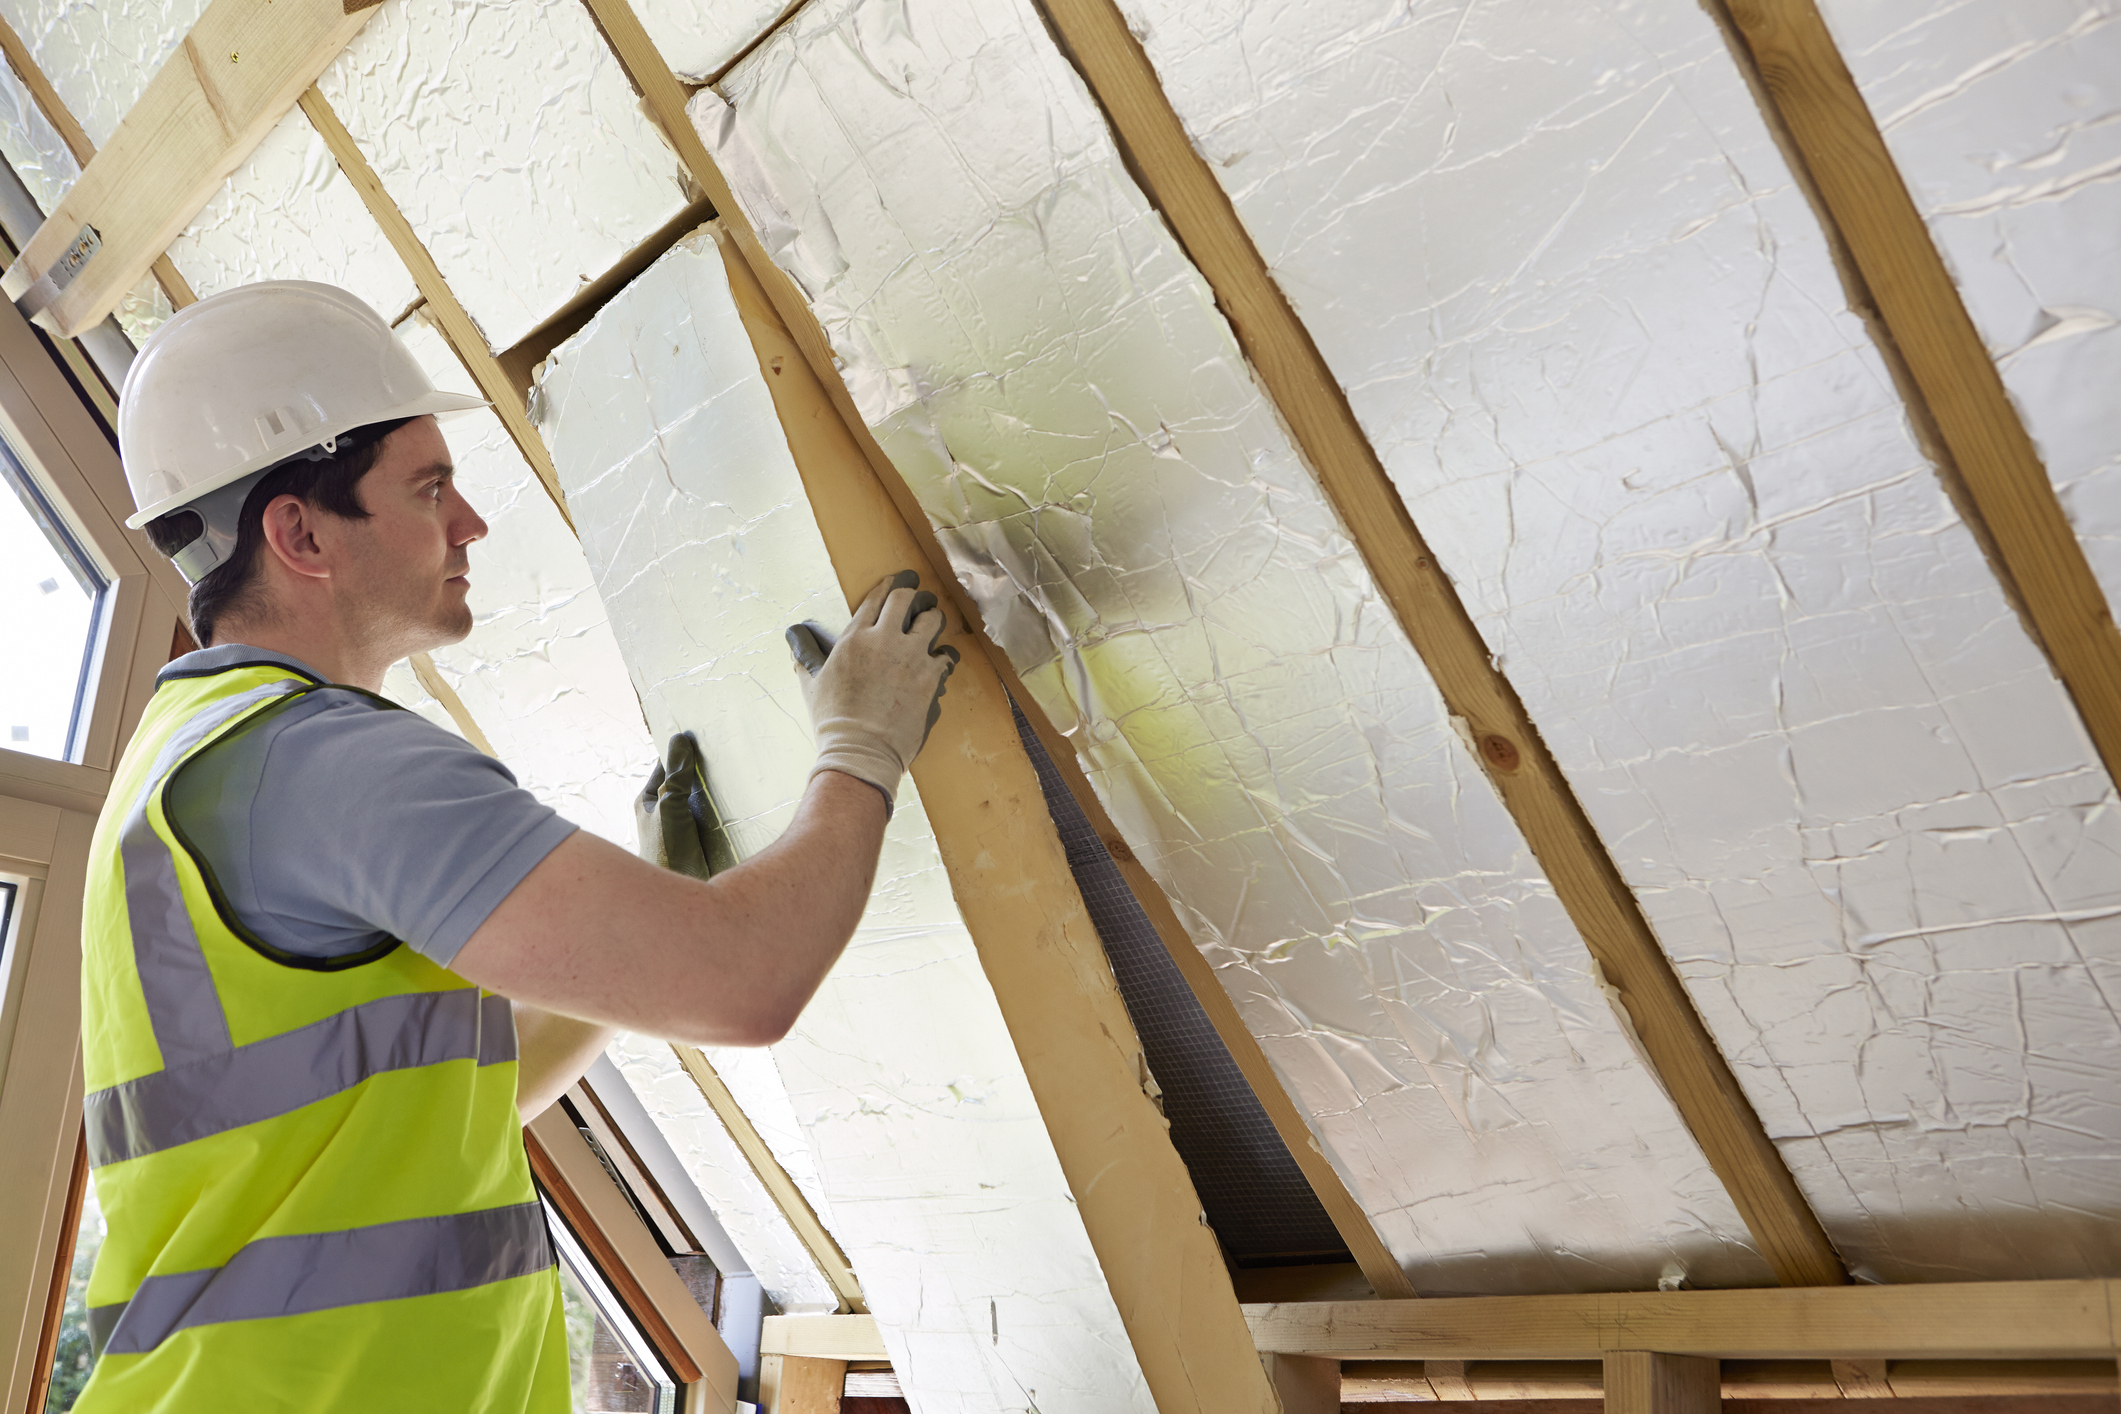 Local tradespeople invited to deliver energy efficiency improvements across the region